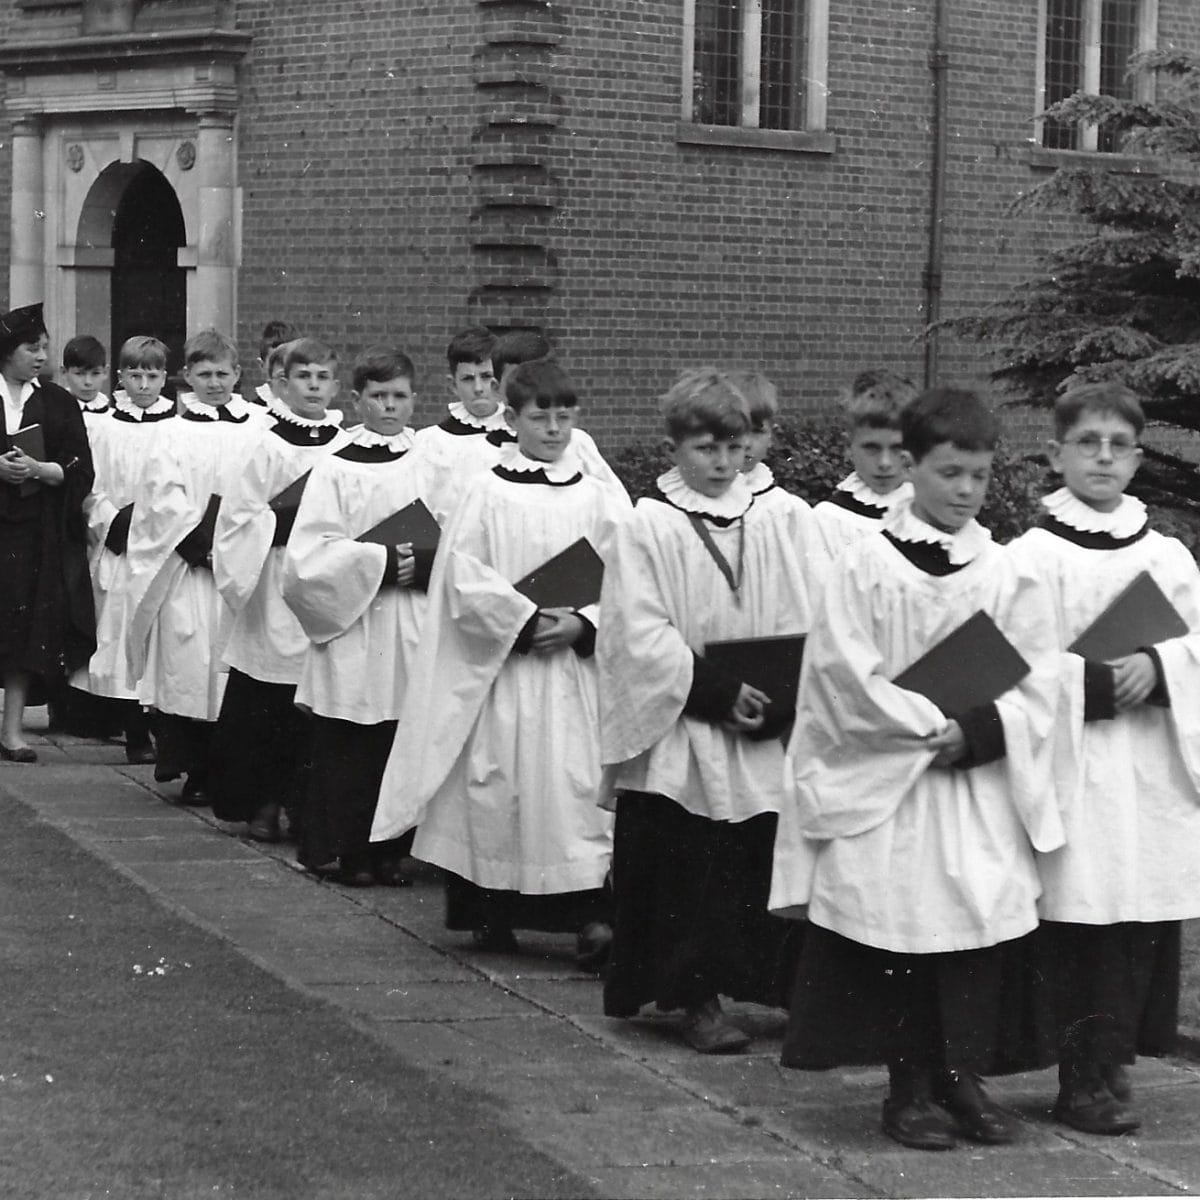 The School Choir dressed in robes walking away from the Chapel in 1959